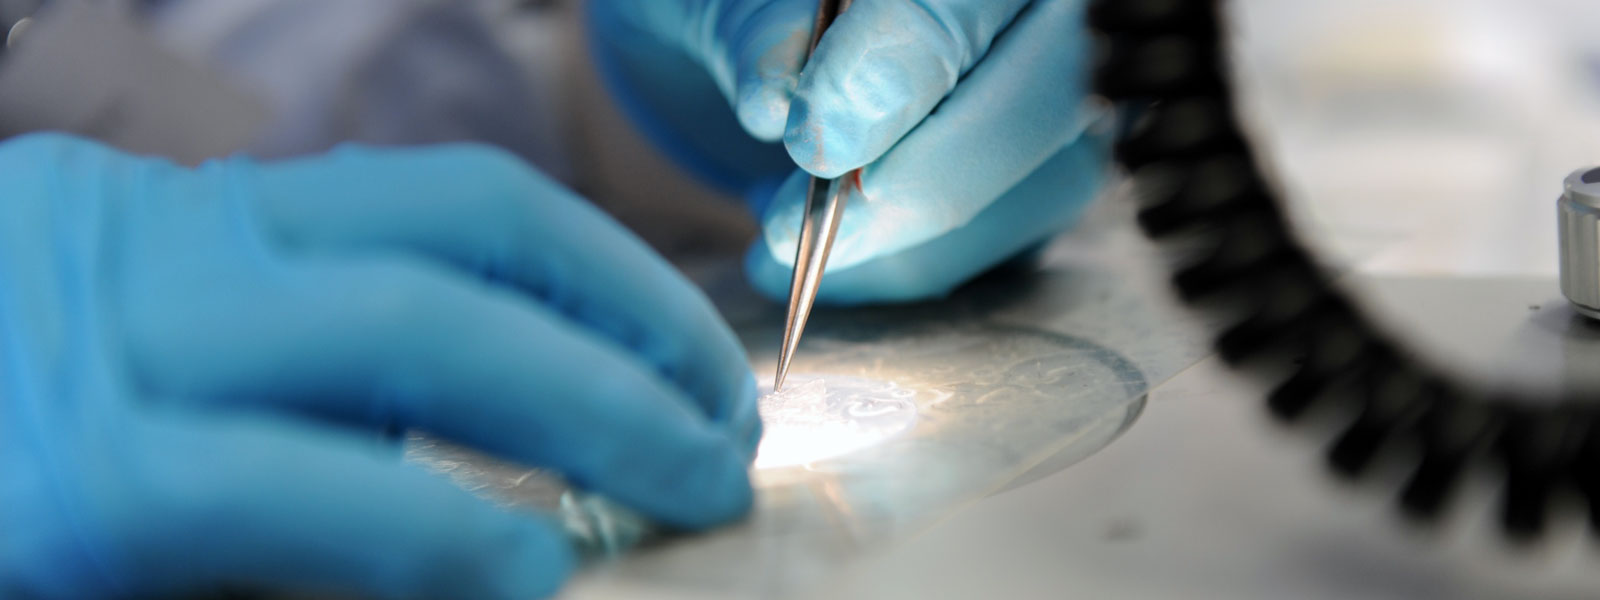 a close up of blue-gloved hands, holding tweezers to analyse a sample in a petrie dish, in a lab